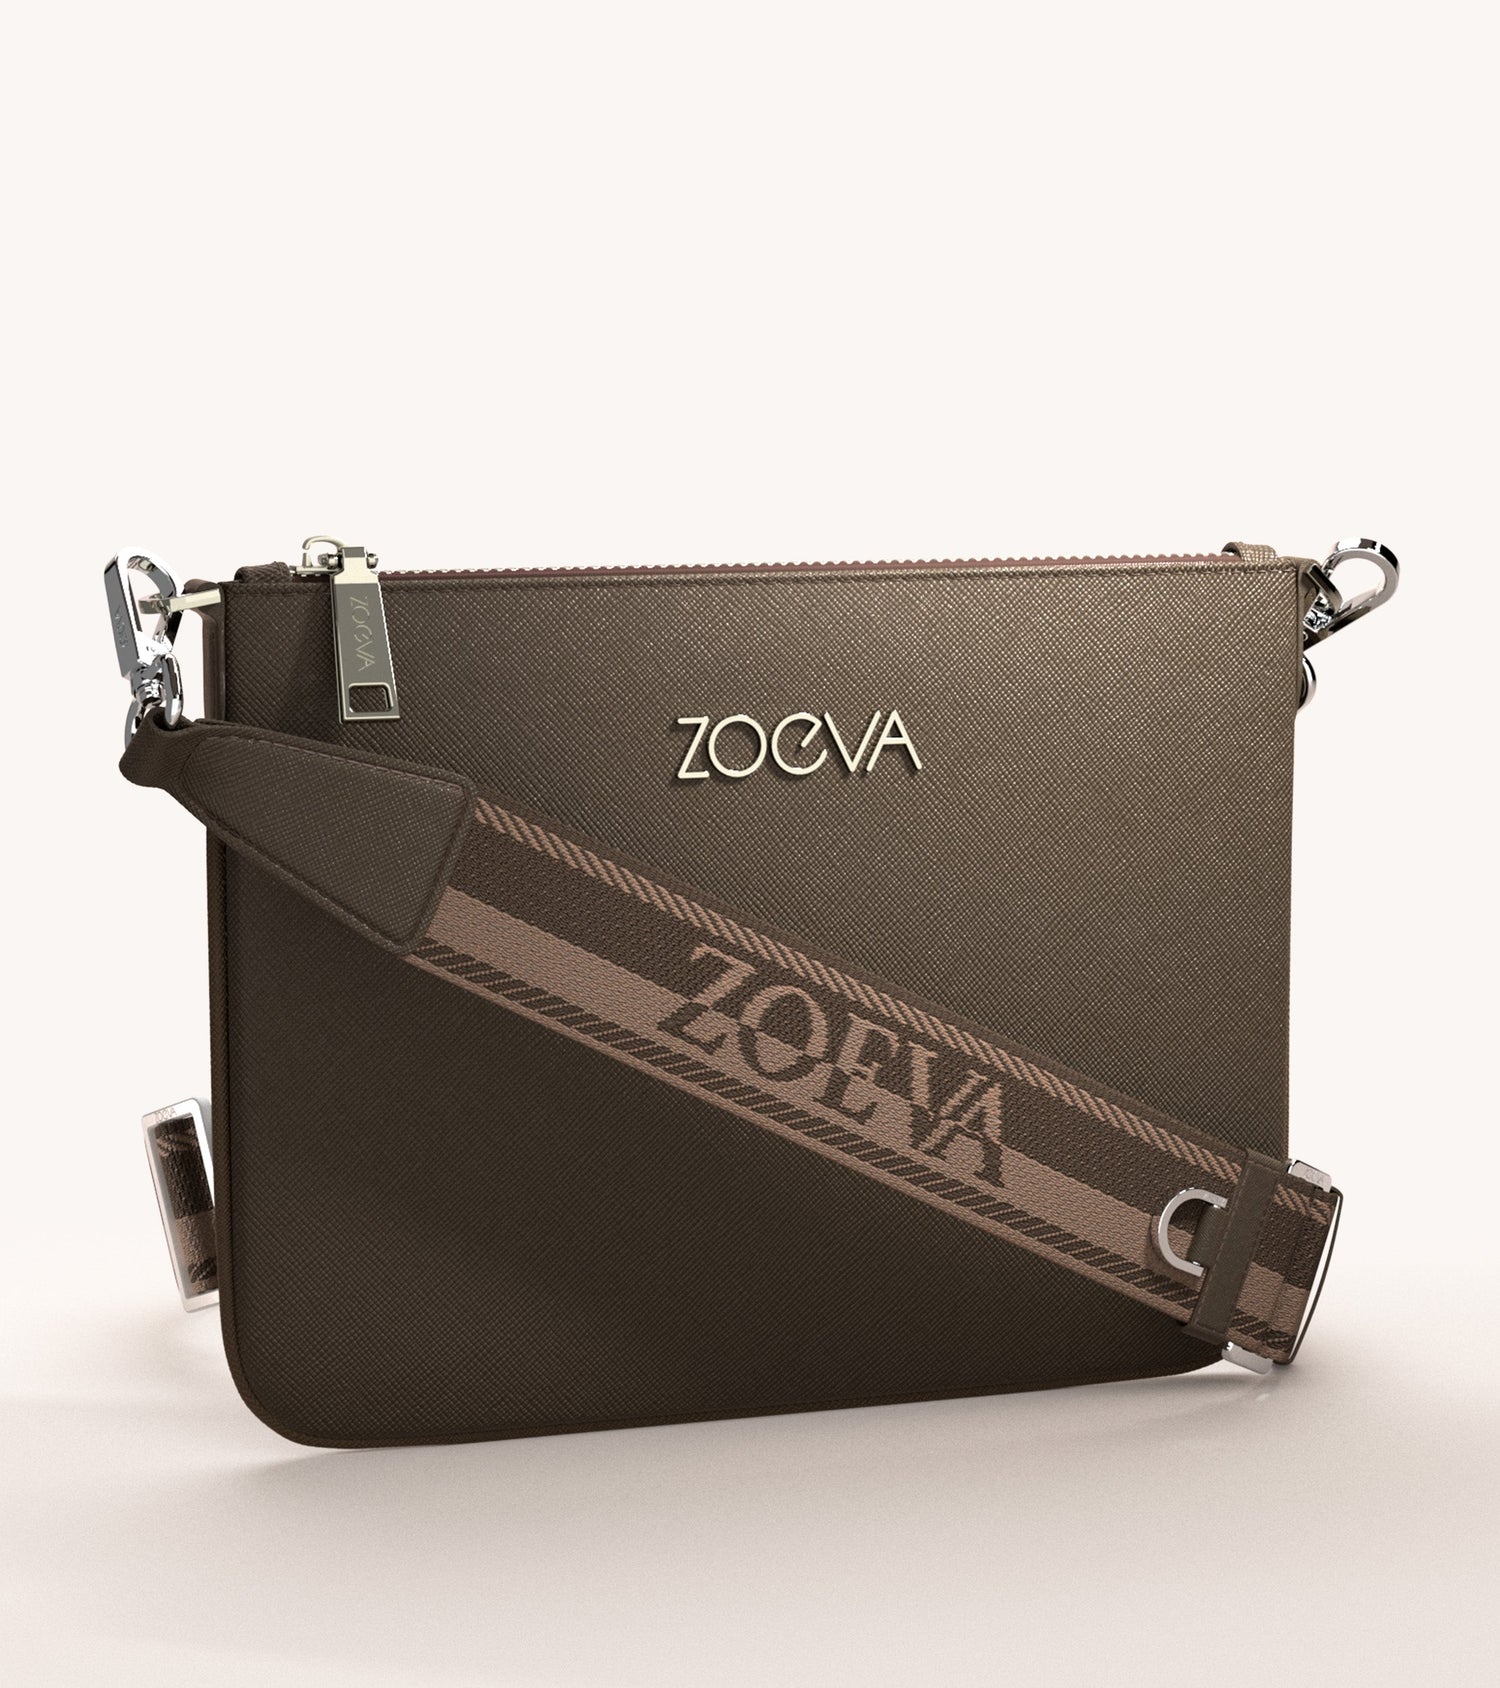 The Everyday Clutch & Shoulder Strap (Chocolate) Main Image featured